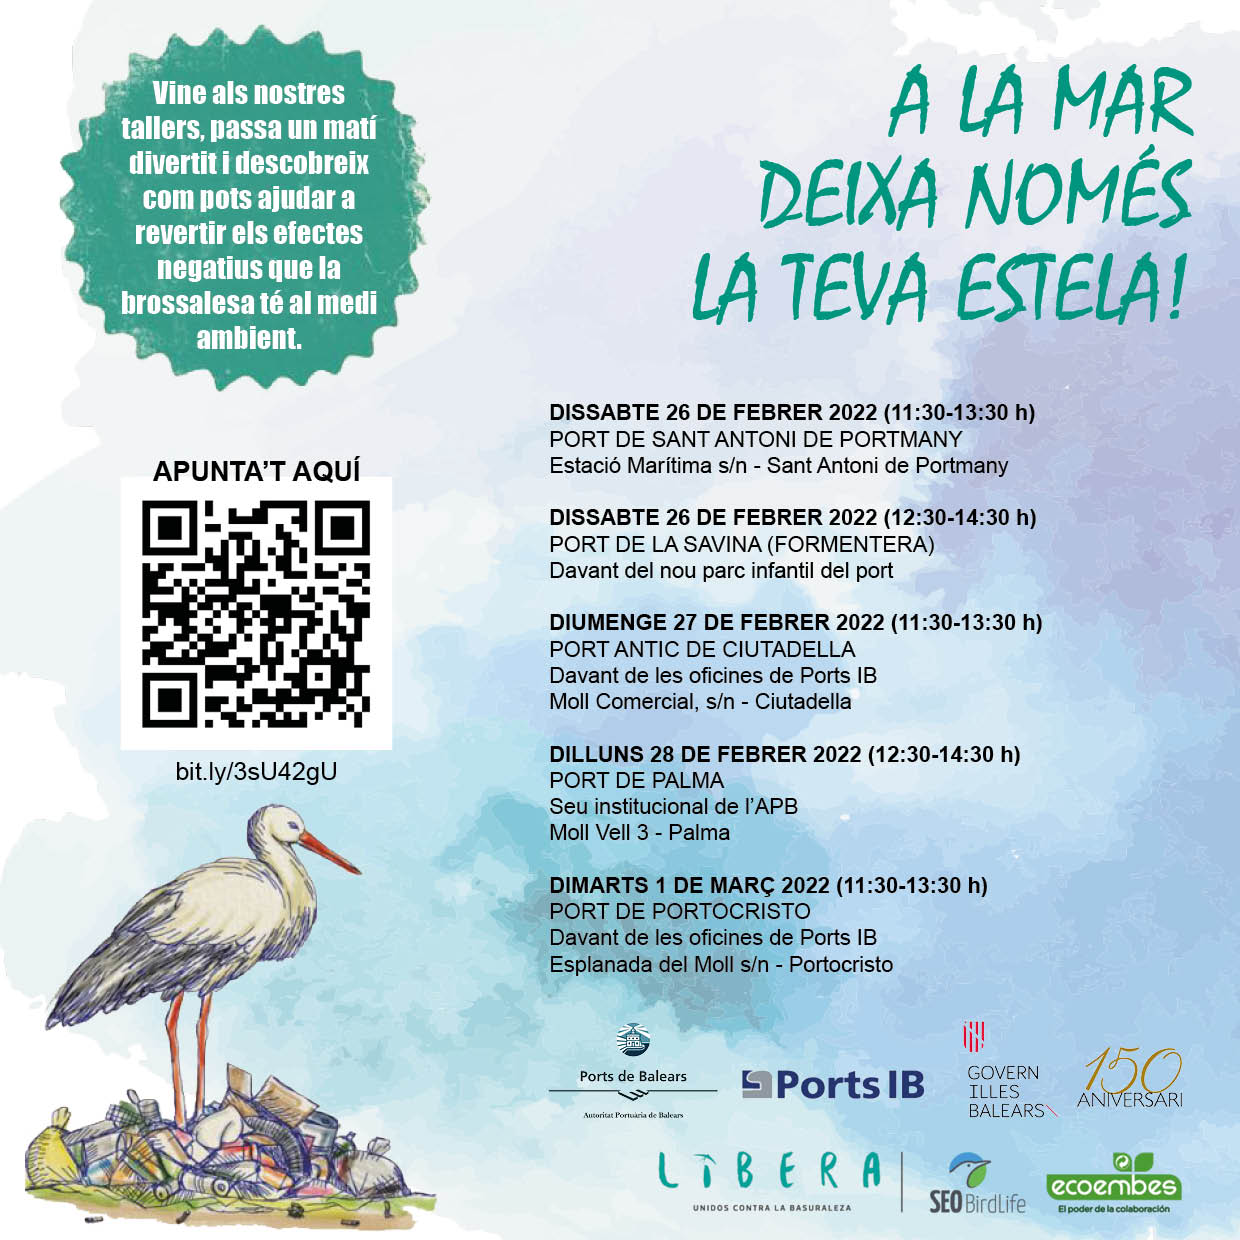 The Port Authority of the Balearic Islands and Ports IB join forces to raise awareness of waste left in natural environment on the occasion of Balearic Islands Day 